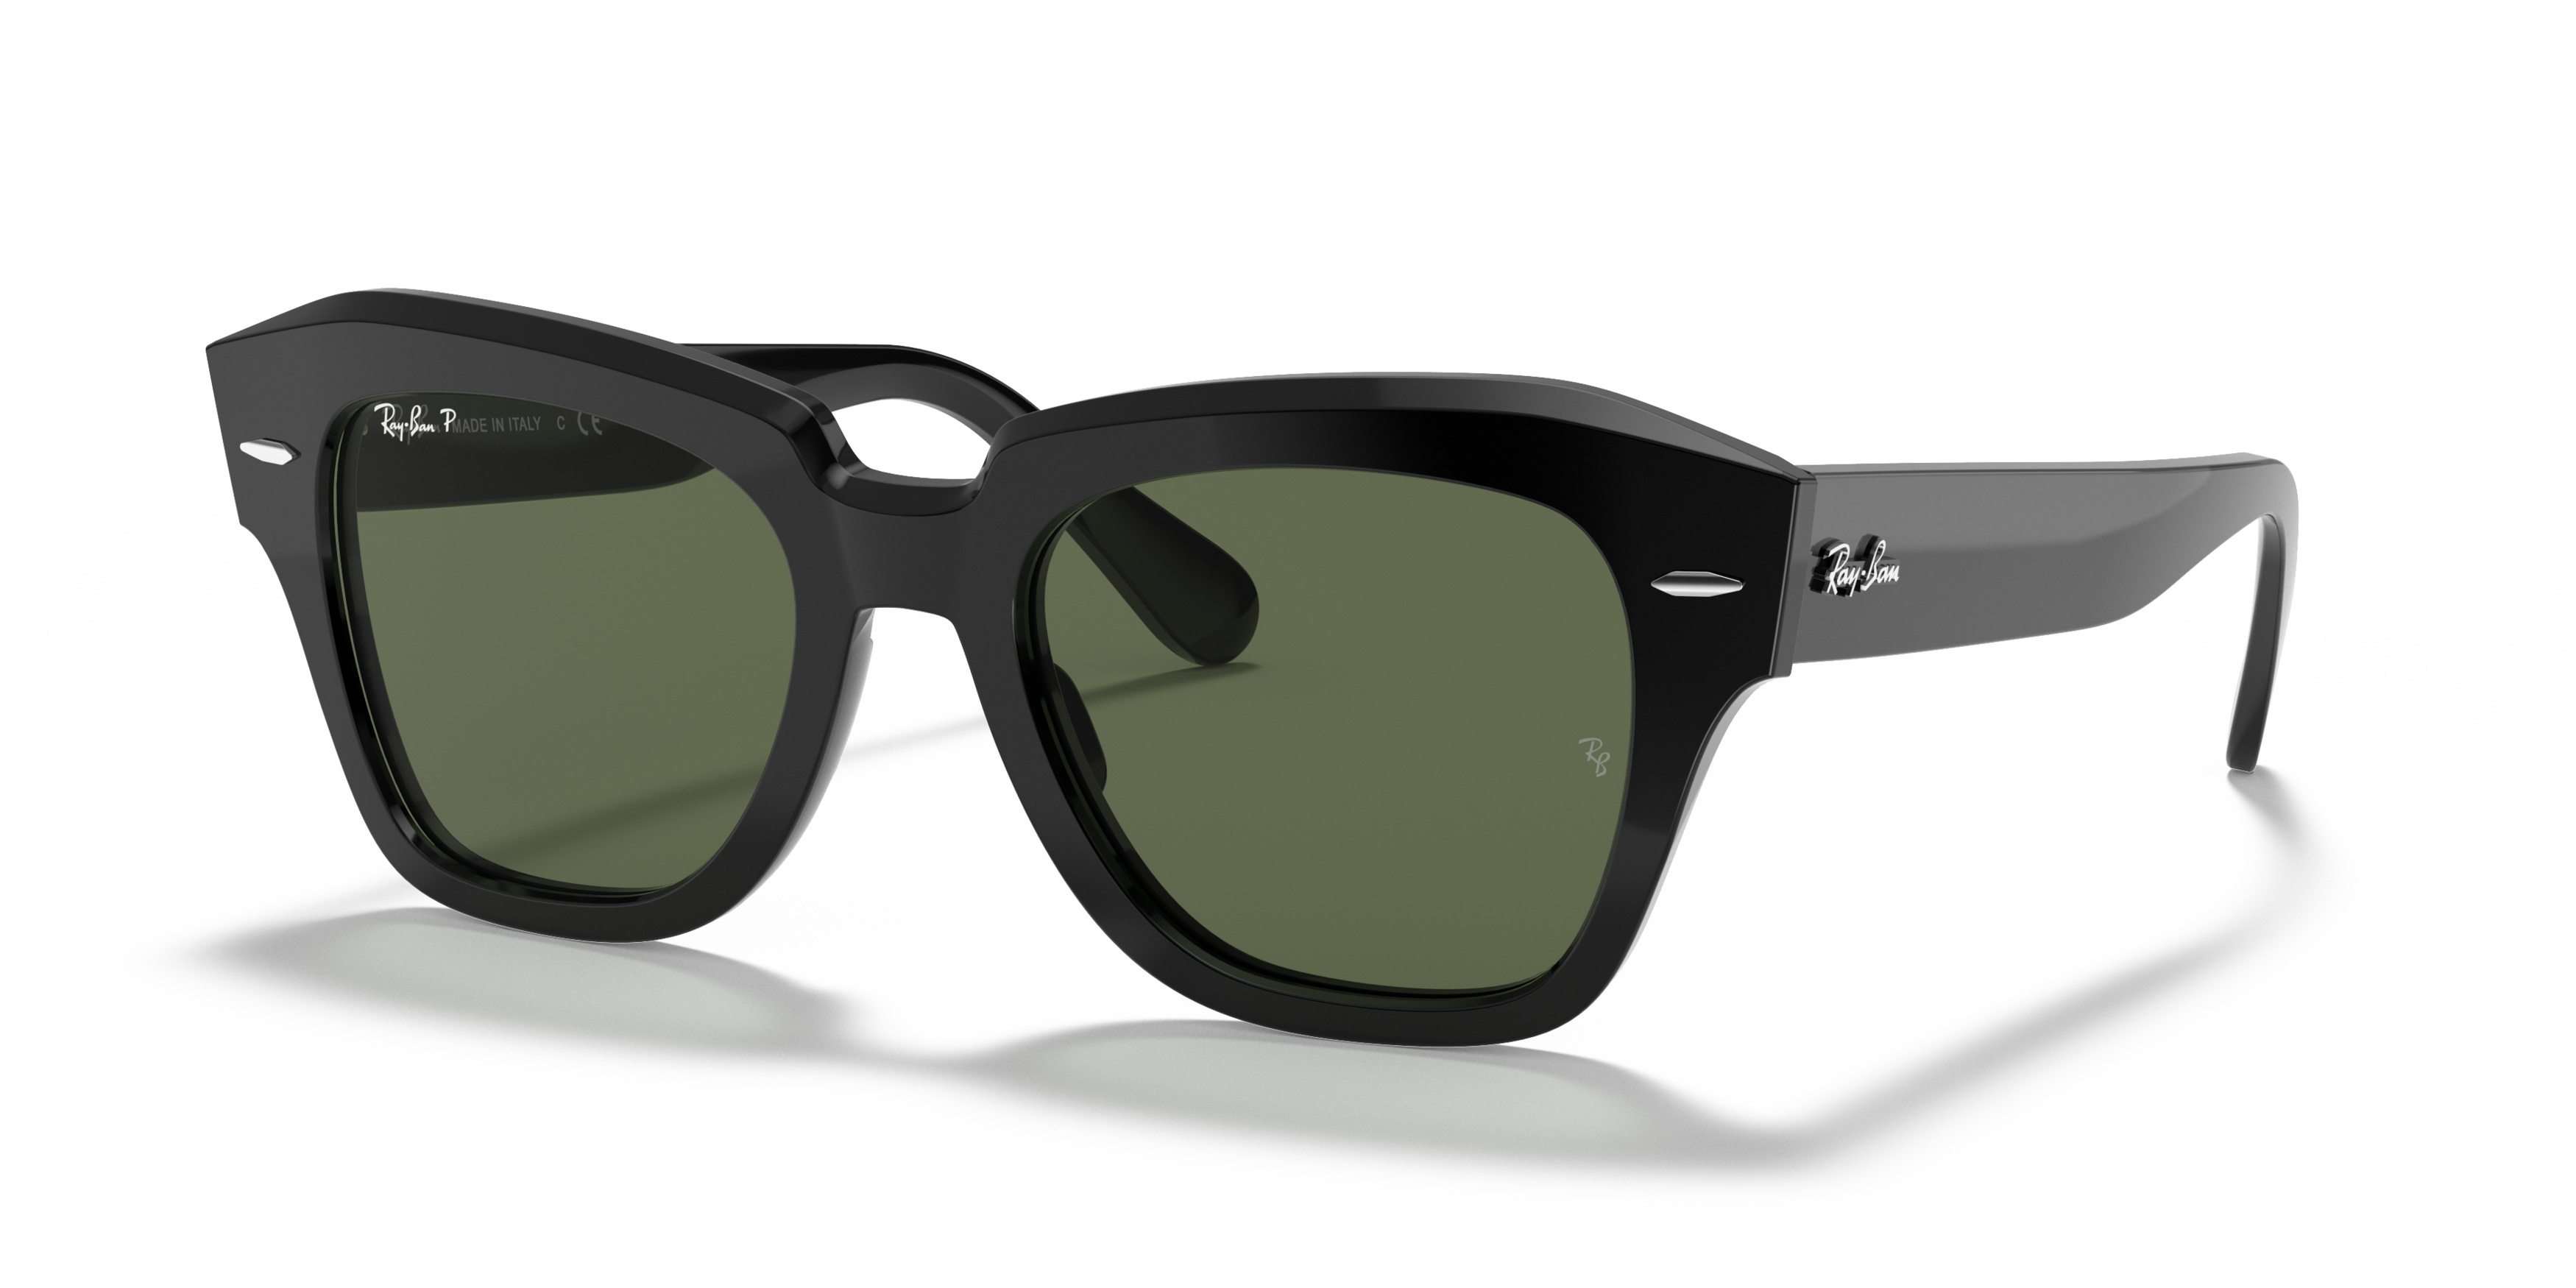 Angle_Left01 Ray Ban State Street 0RB2186 901/58 Verde / Negro